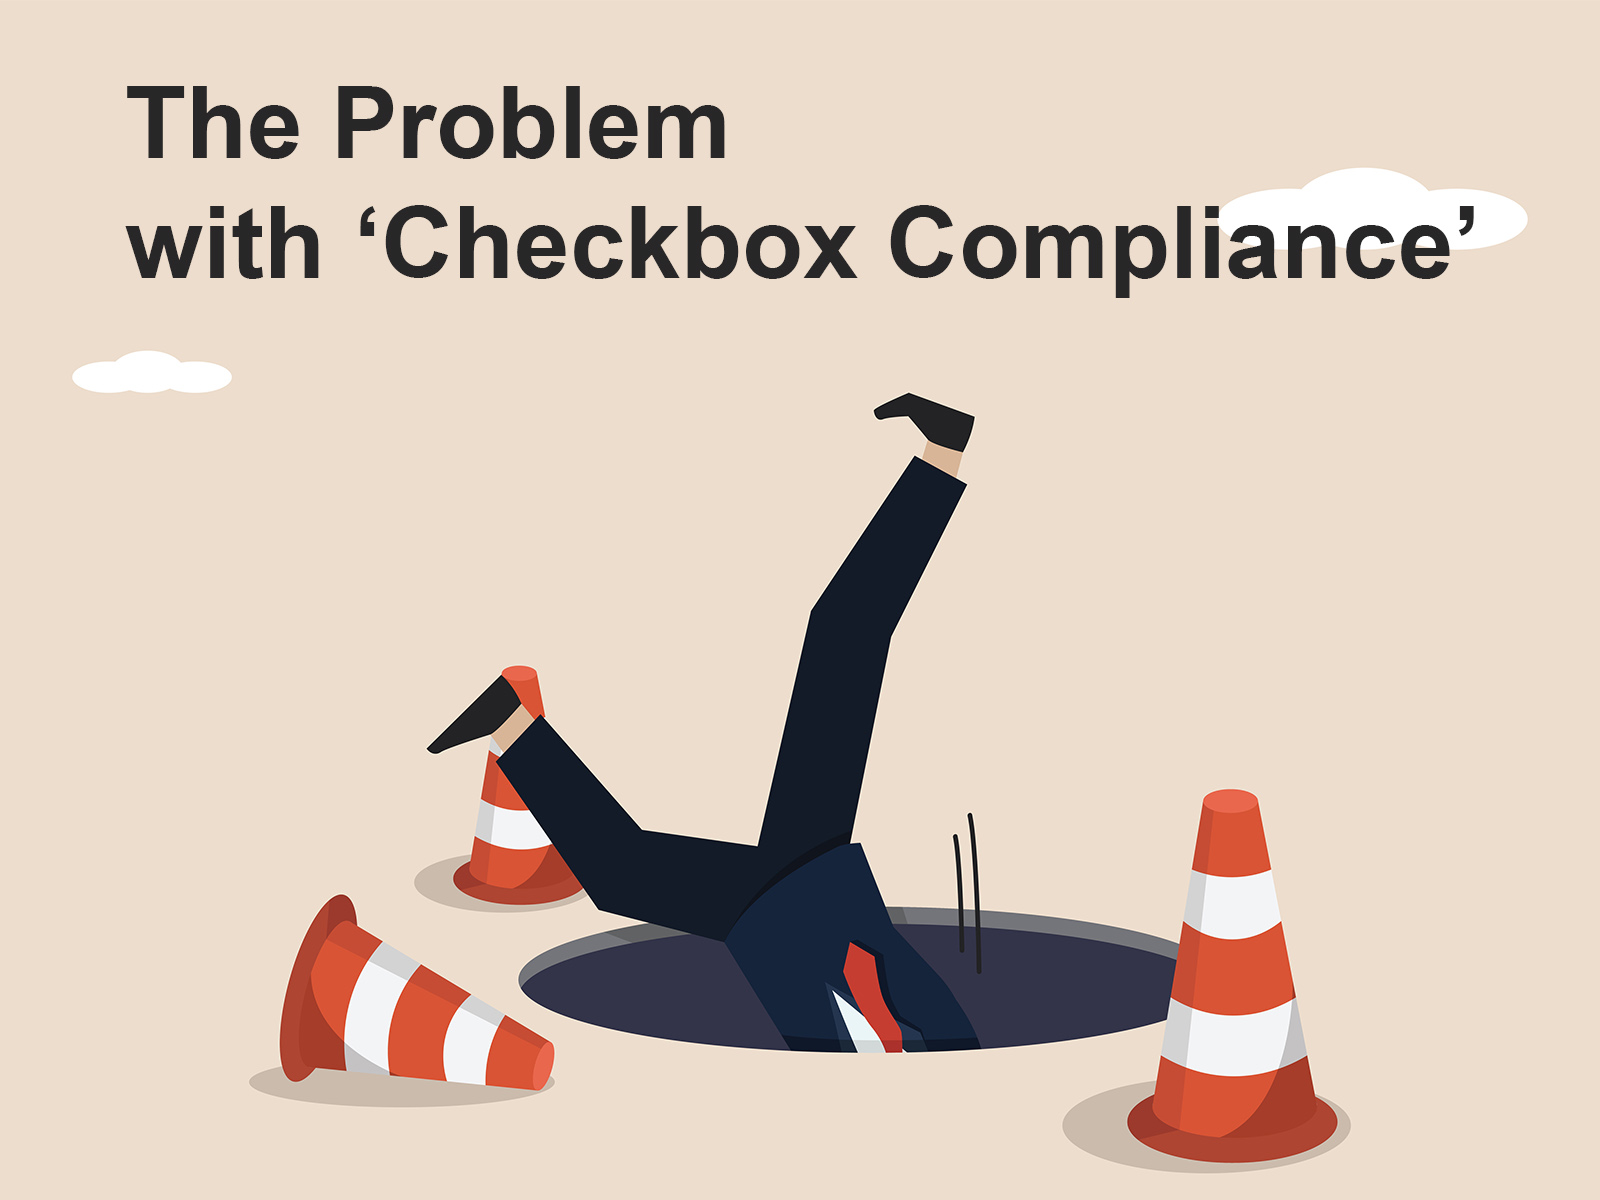 The art shows a cartoon style graphic of a person falling into a hole that was marked with warning cones. The art is to illustrate the problem with Checkbox Compliance in the field of AML Compliance and GRC.